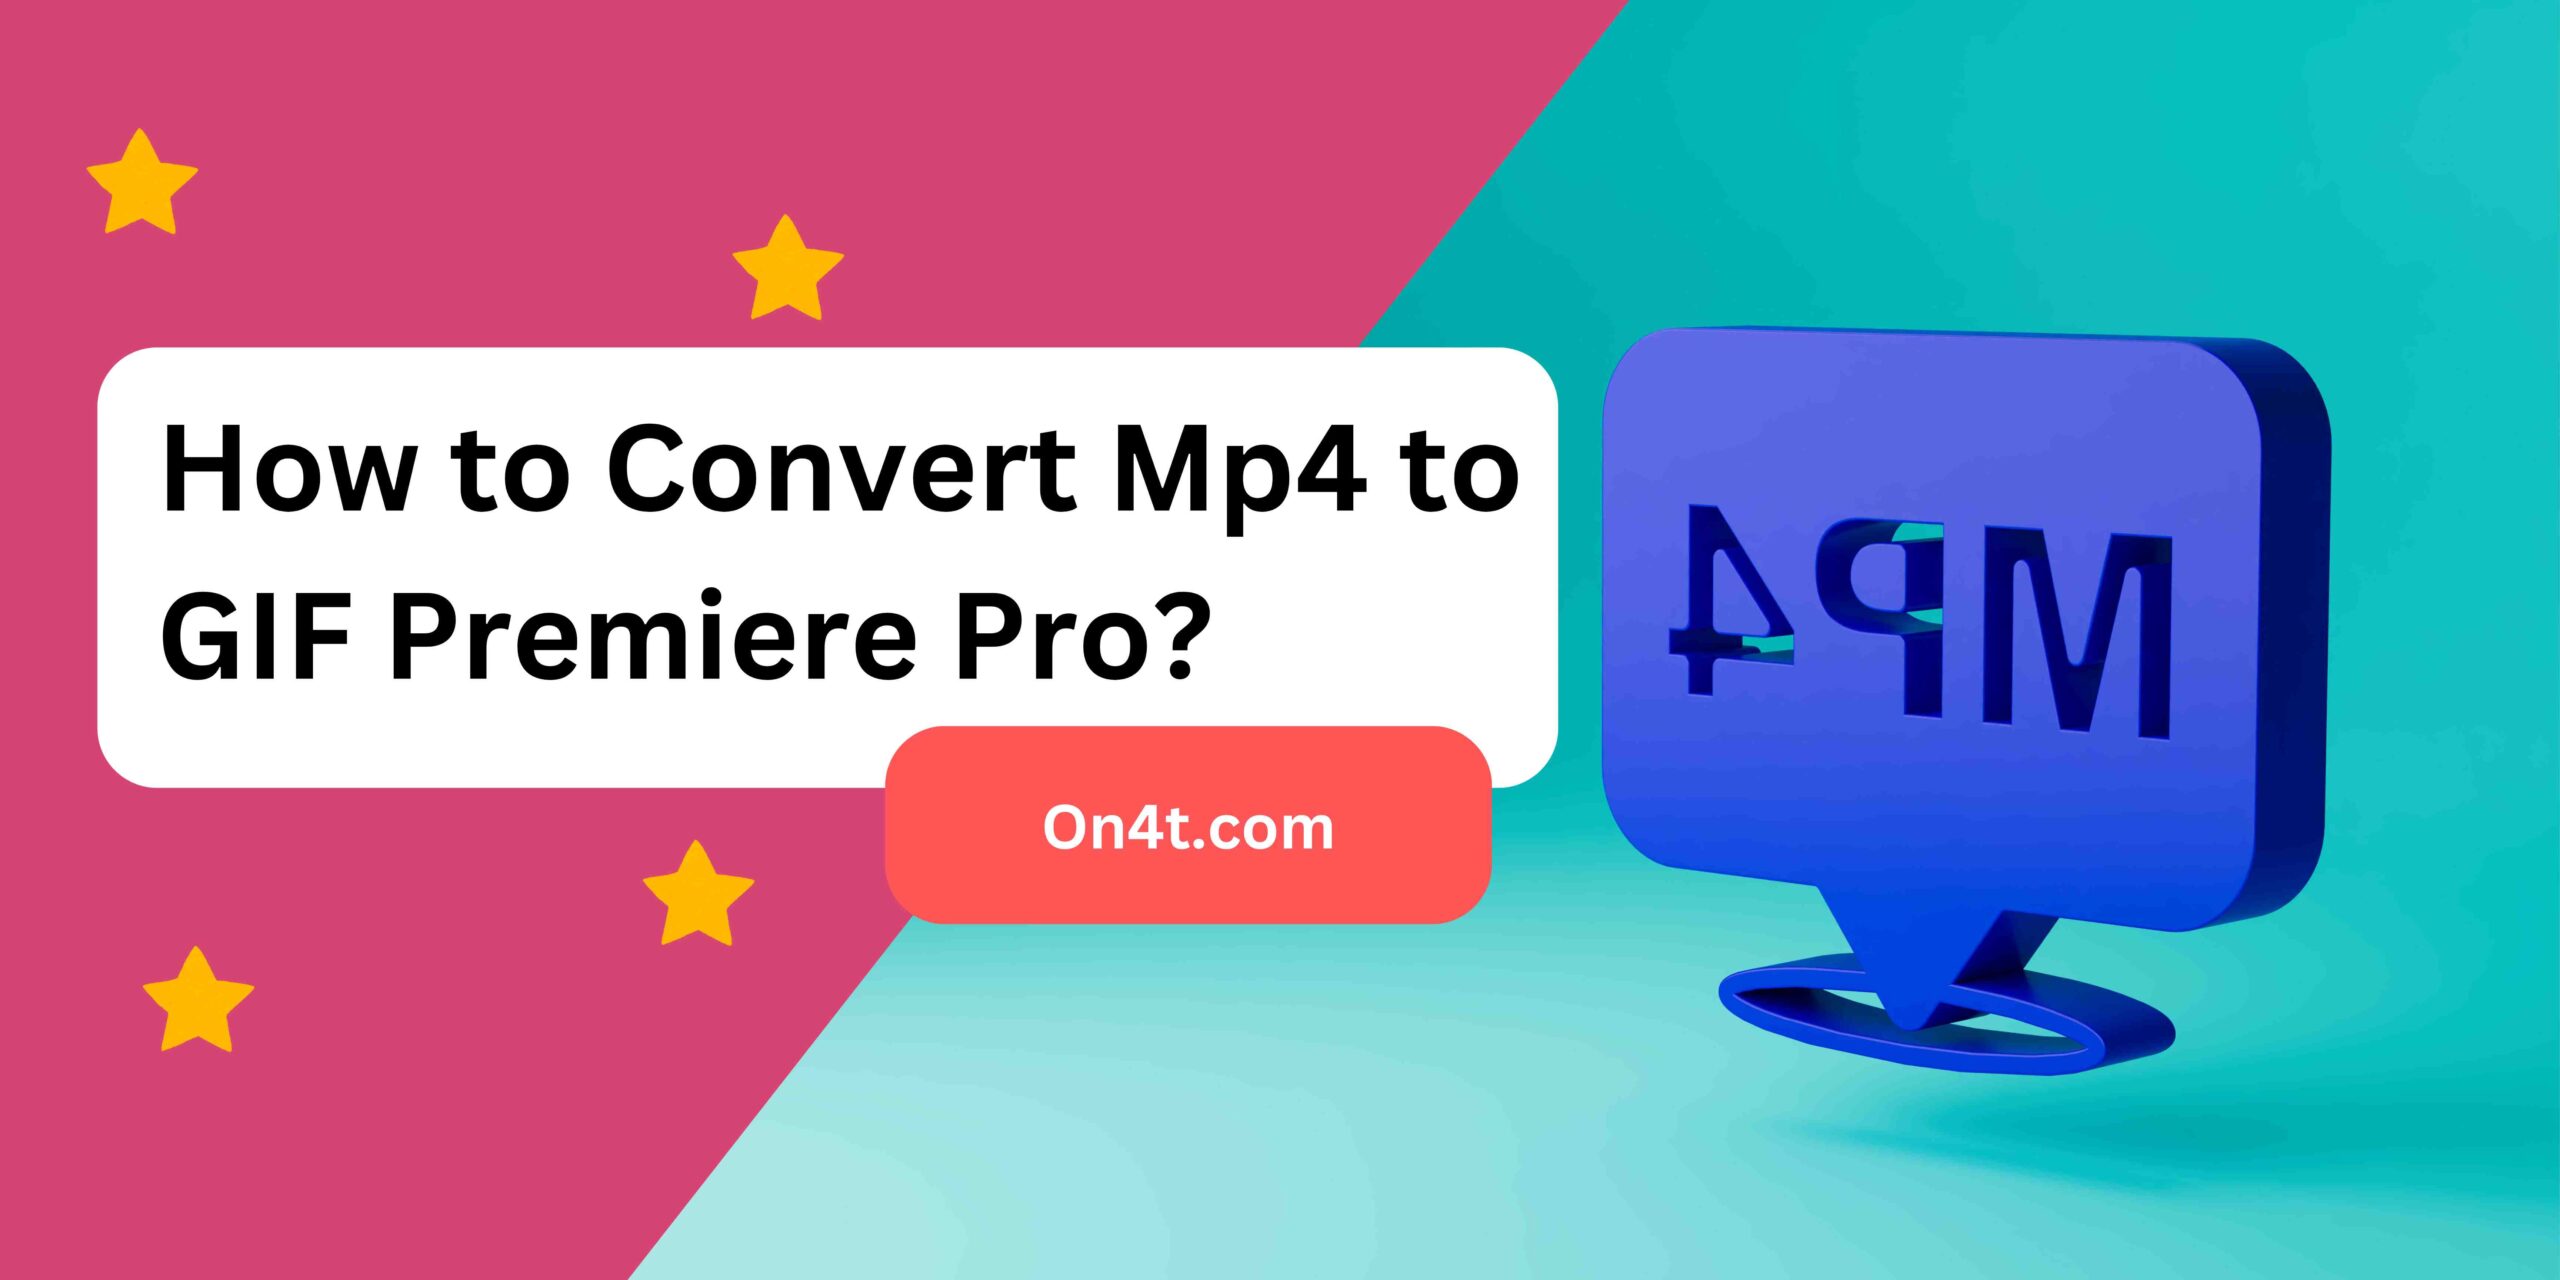 How to Convert Mp4 to GIF Premiere Pro?